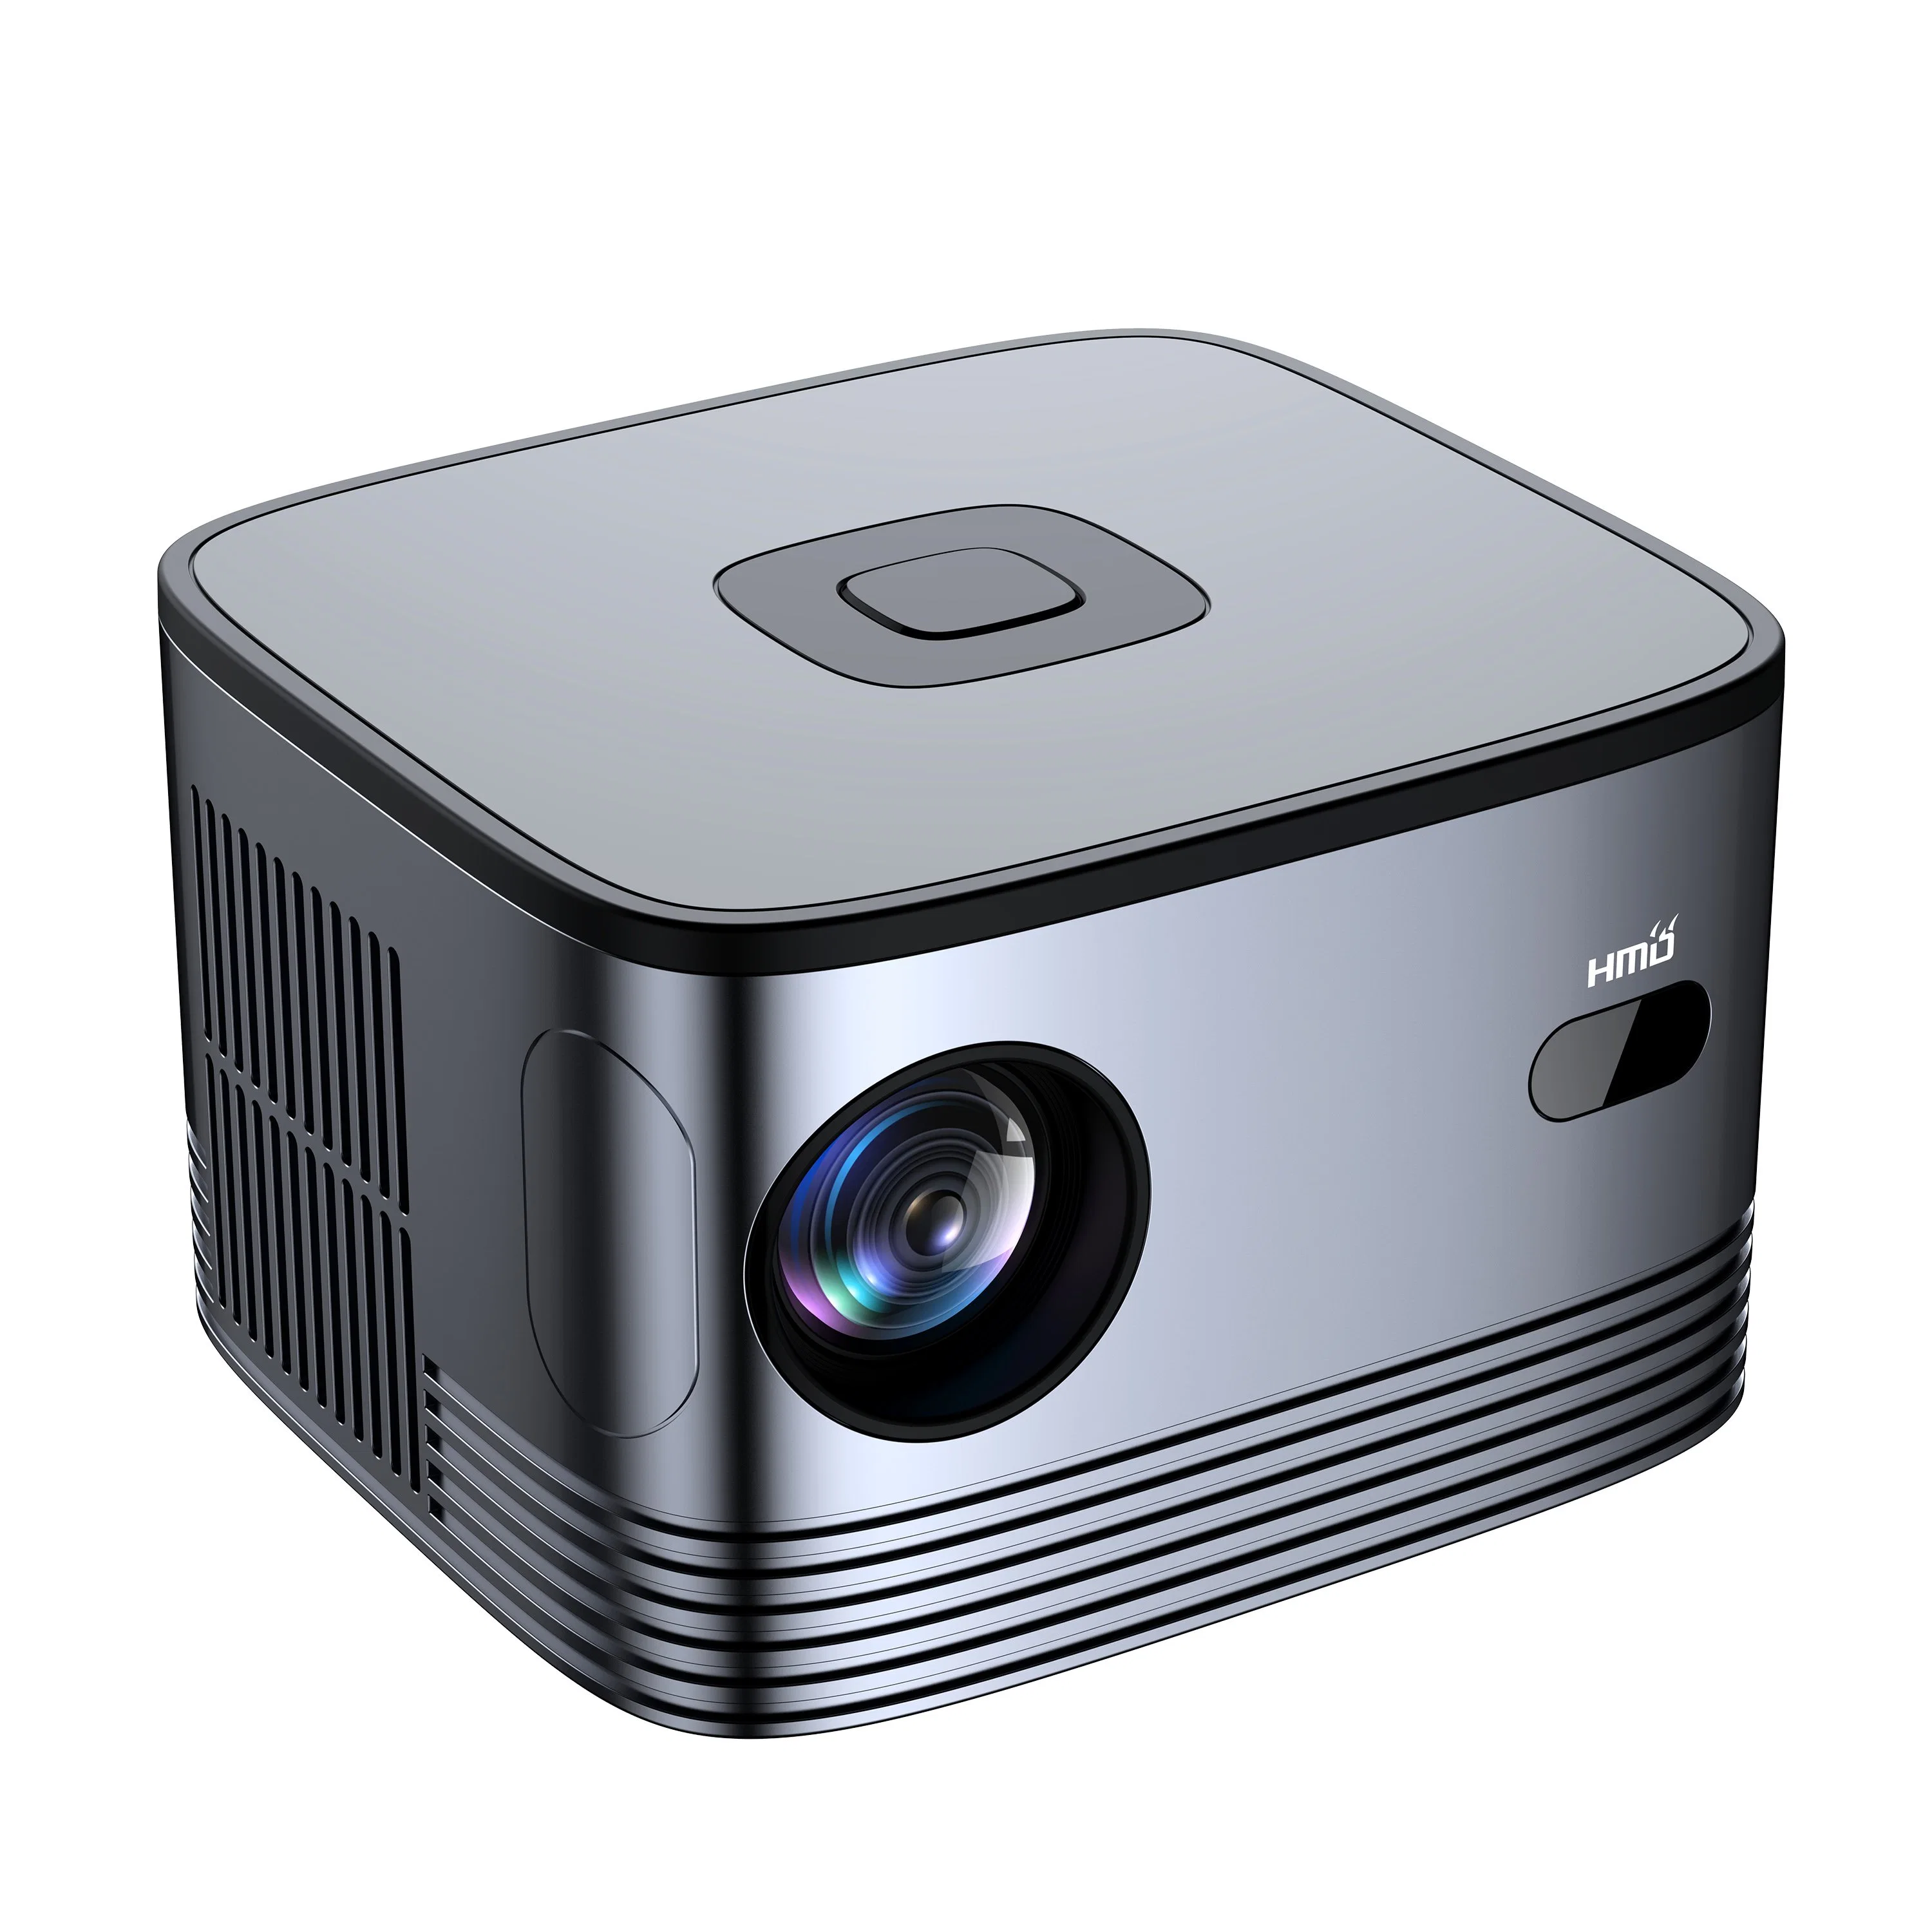 4K Mini 1080P WiFi Smart LCD LED Android Mobile Portable Video Projector